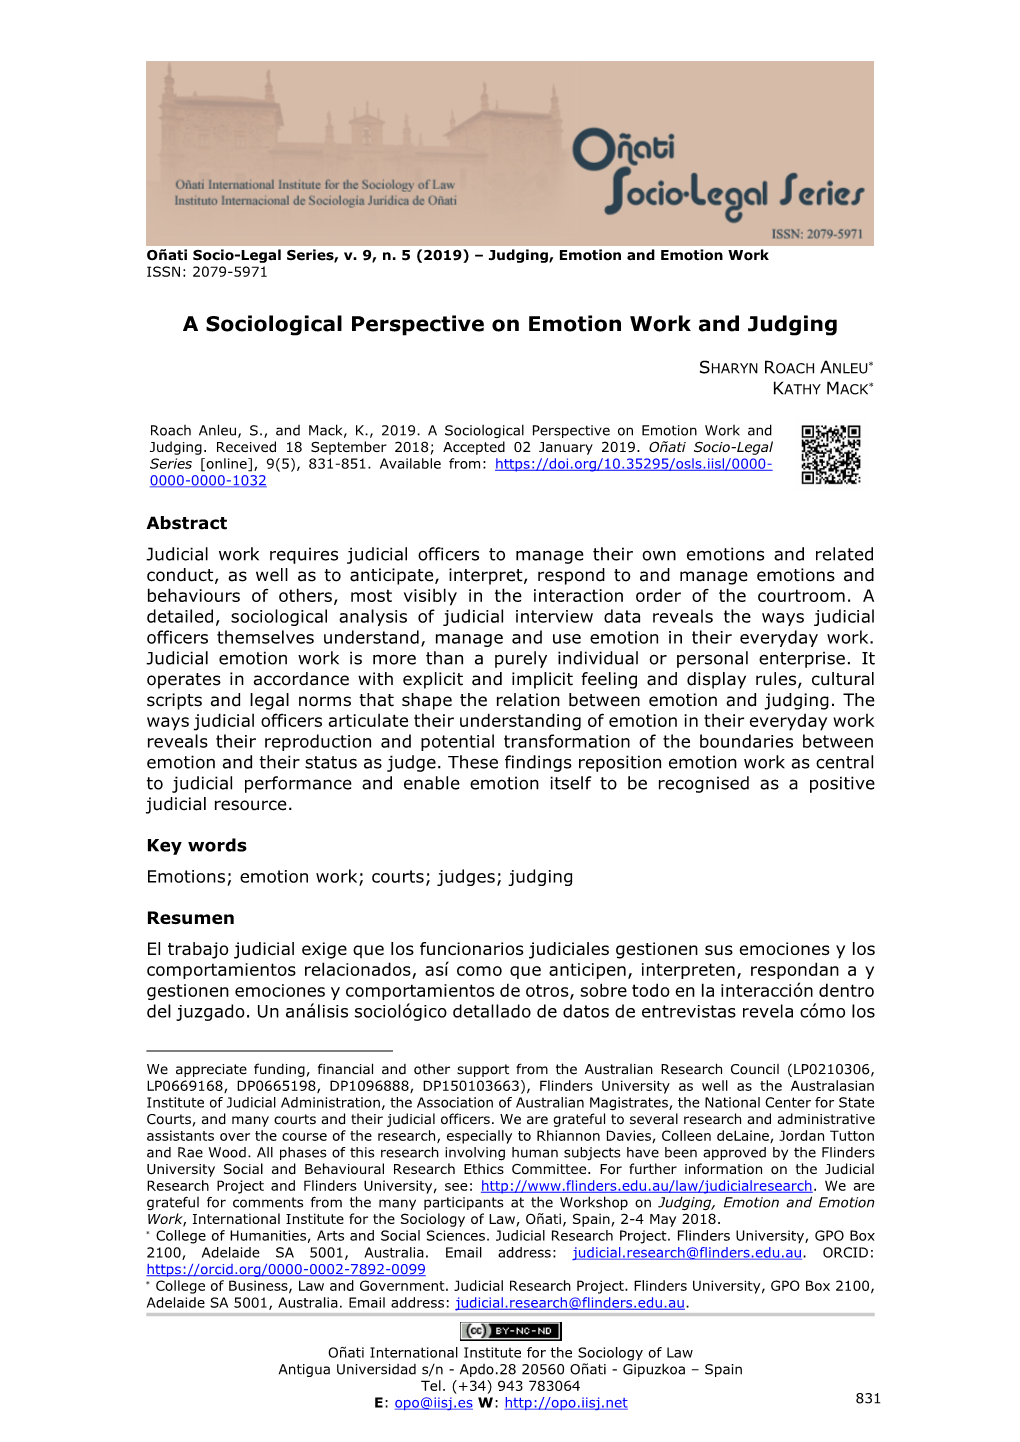 A Sociological Perspective on Emotion Work and Judging